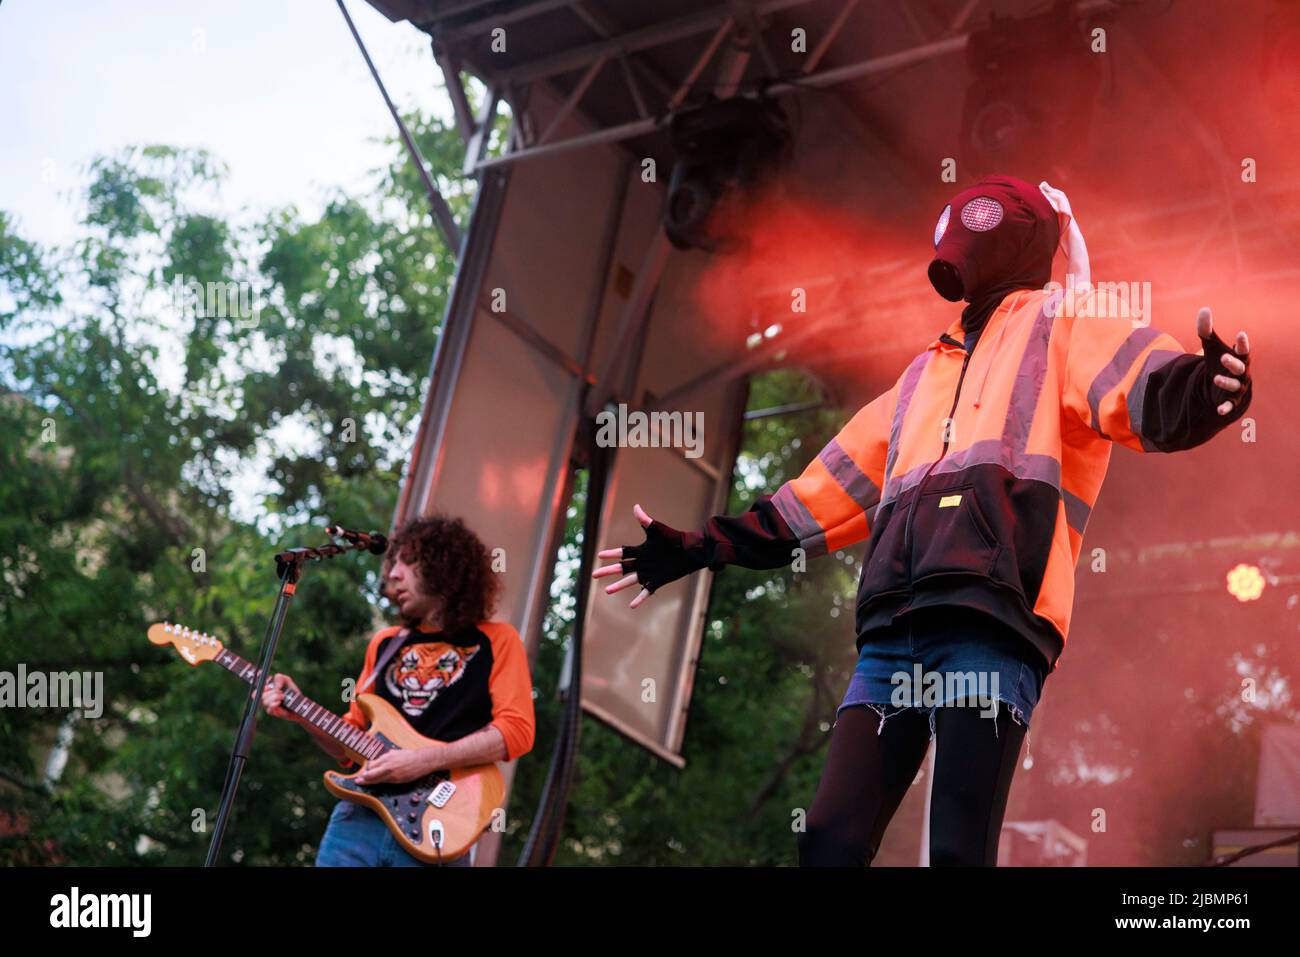 BLOOMINGTON, INDIANA - JUNE 4: Will Toledo of Car Seat Headrest, right, wears a mask, Ethan Ives plays guitar, while performing during the Granfalloon festival on June 4, 2022, in Bloomington, Indiana. ÒGranfalloon is an annual festival of arts, music, and scholarship inspired by Hoosier author Kurt Vonnegut,Ó according to the eventÕs webpage. The festival takes place in Bloomington, Indiana. Stock Photo